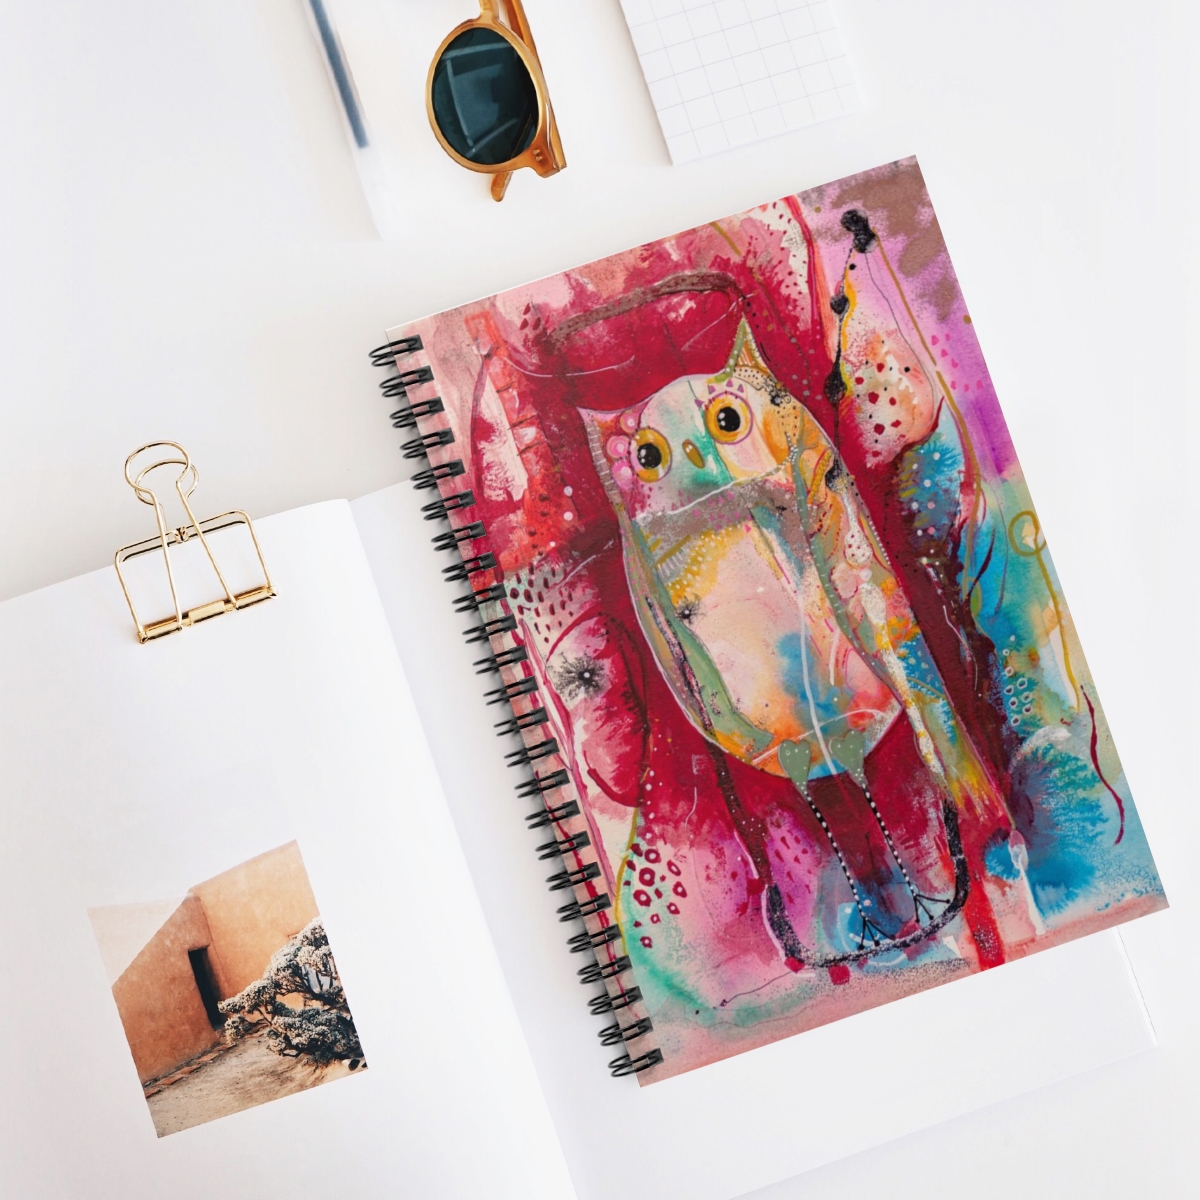 Whimsical owl journal in context- Owl is multi-coloured on an abstract background.